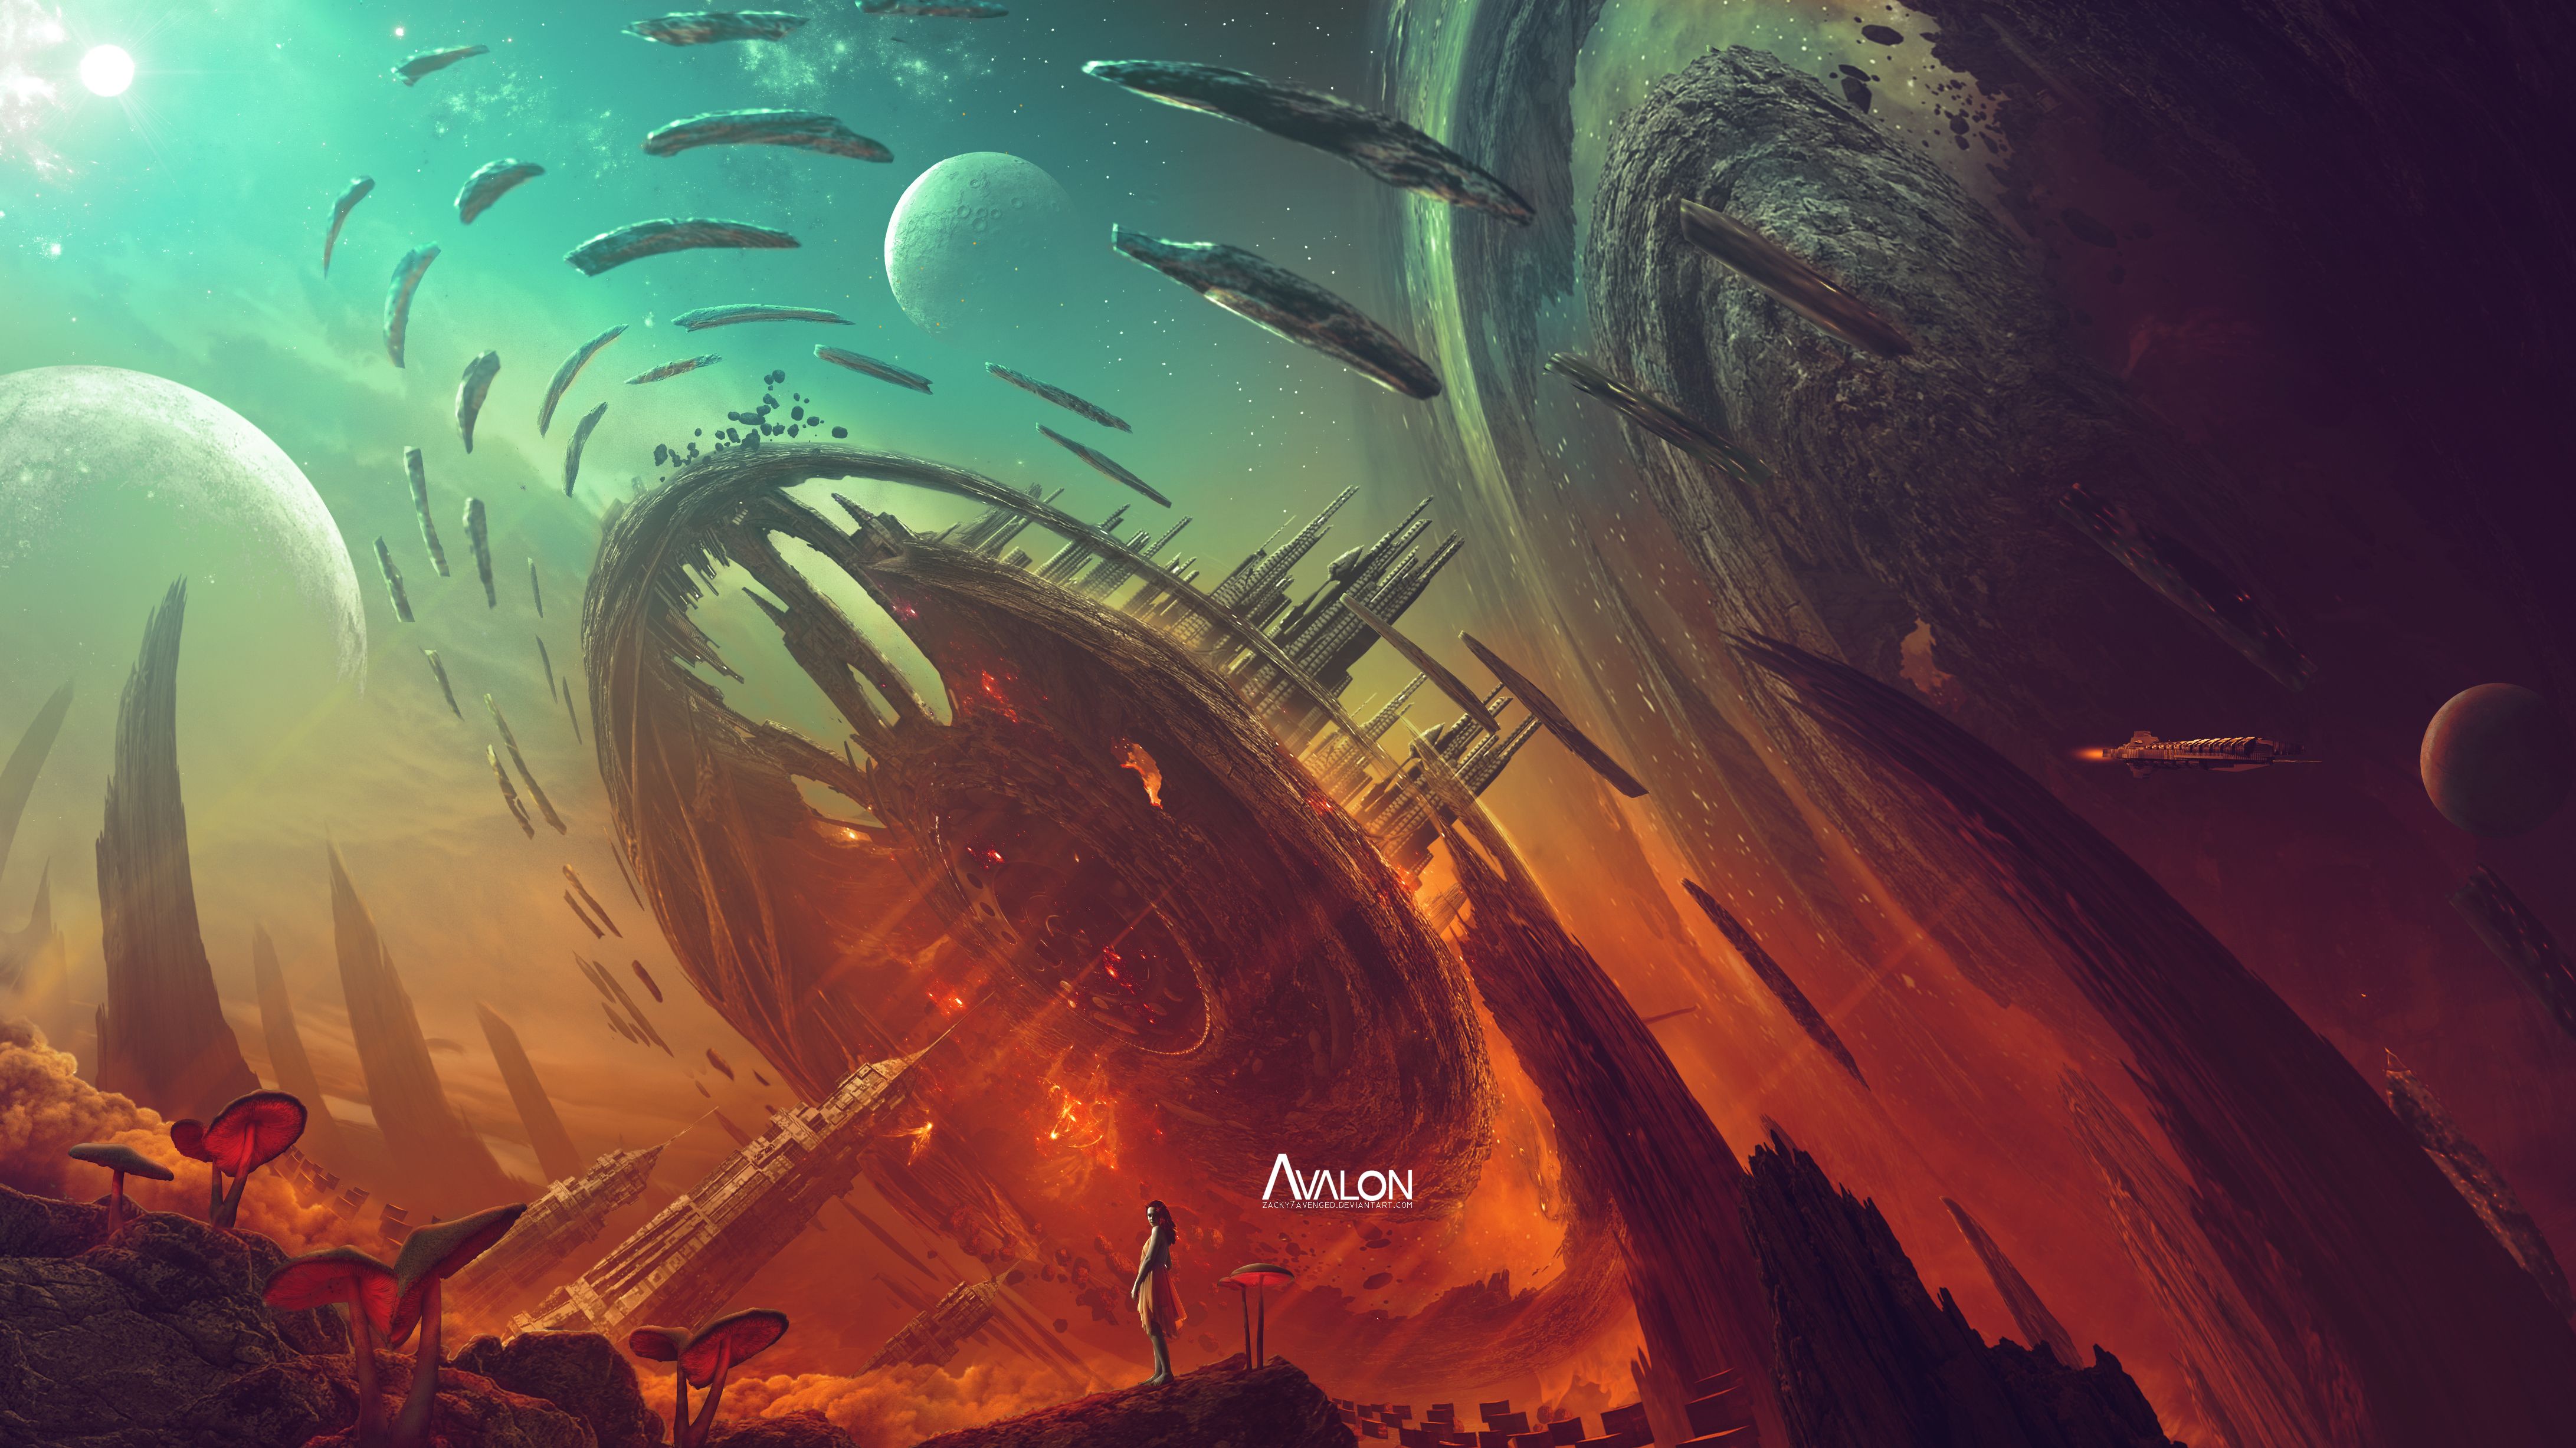 Sci Fi Abstract Art Wallpapers